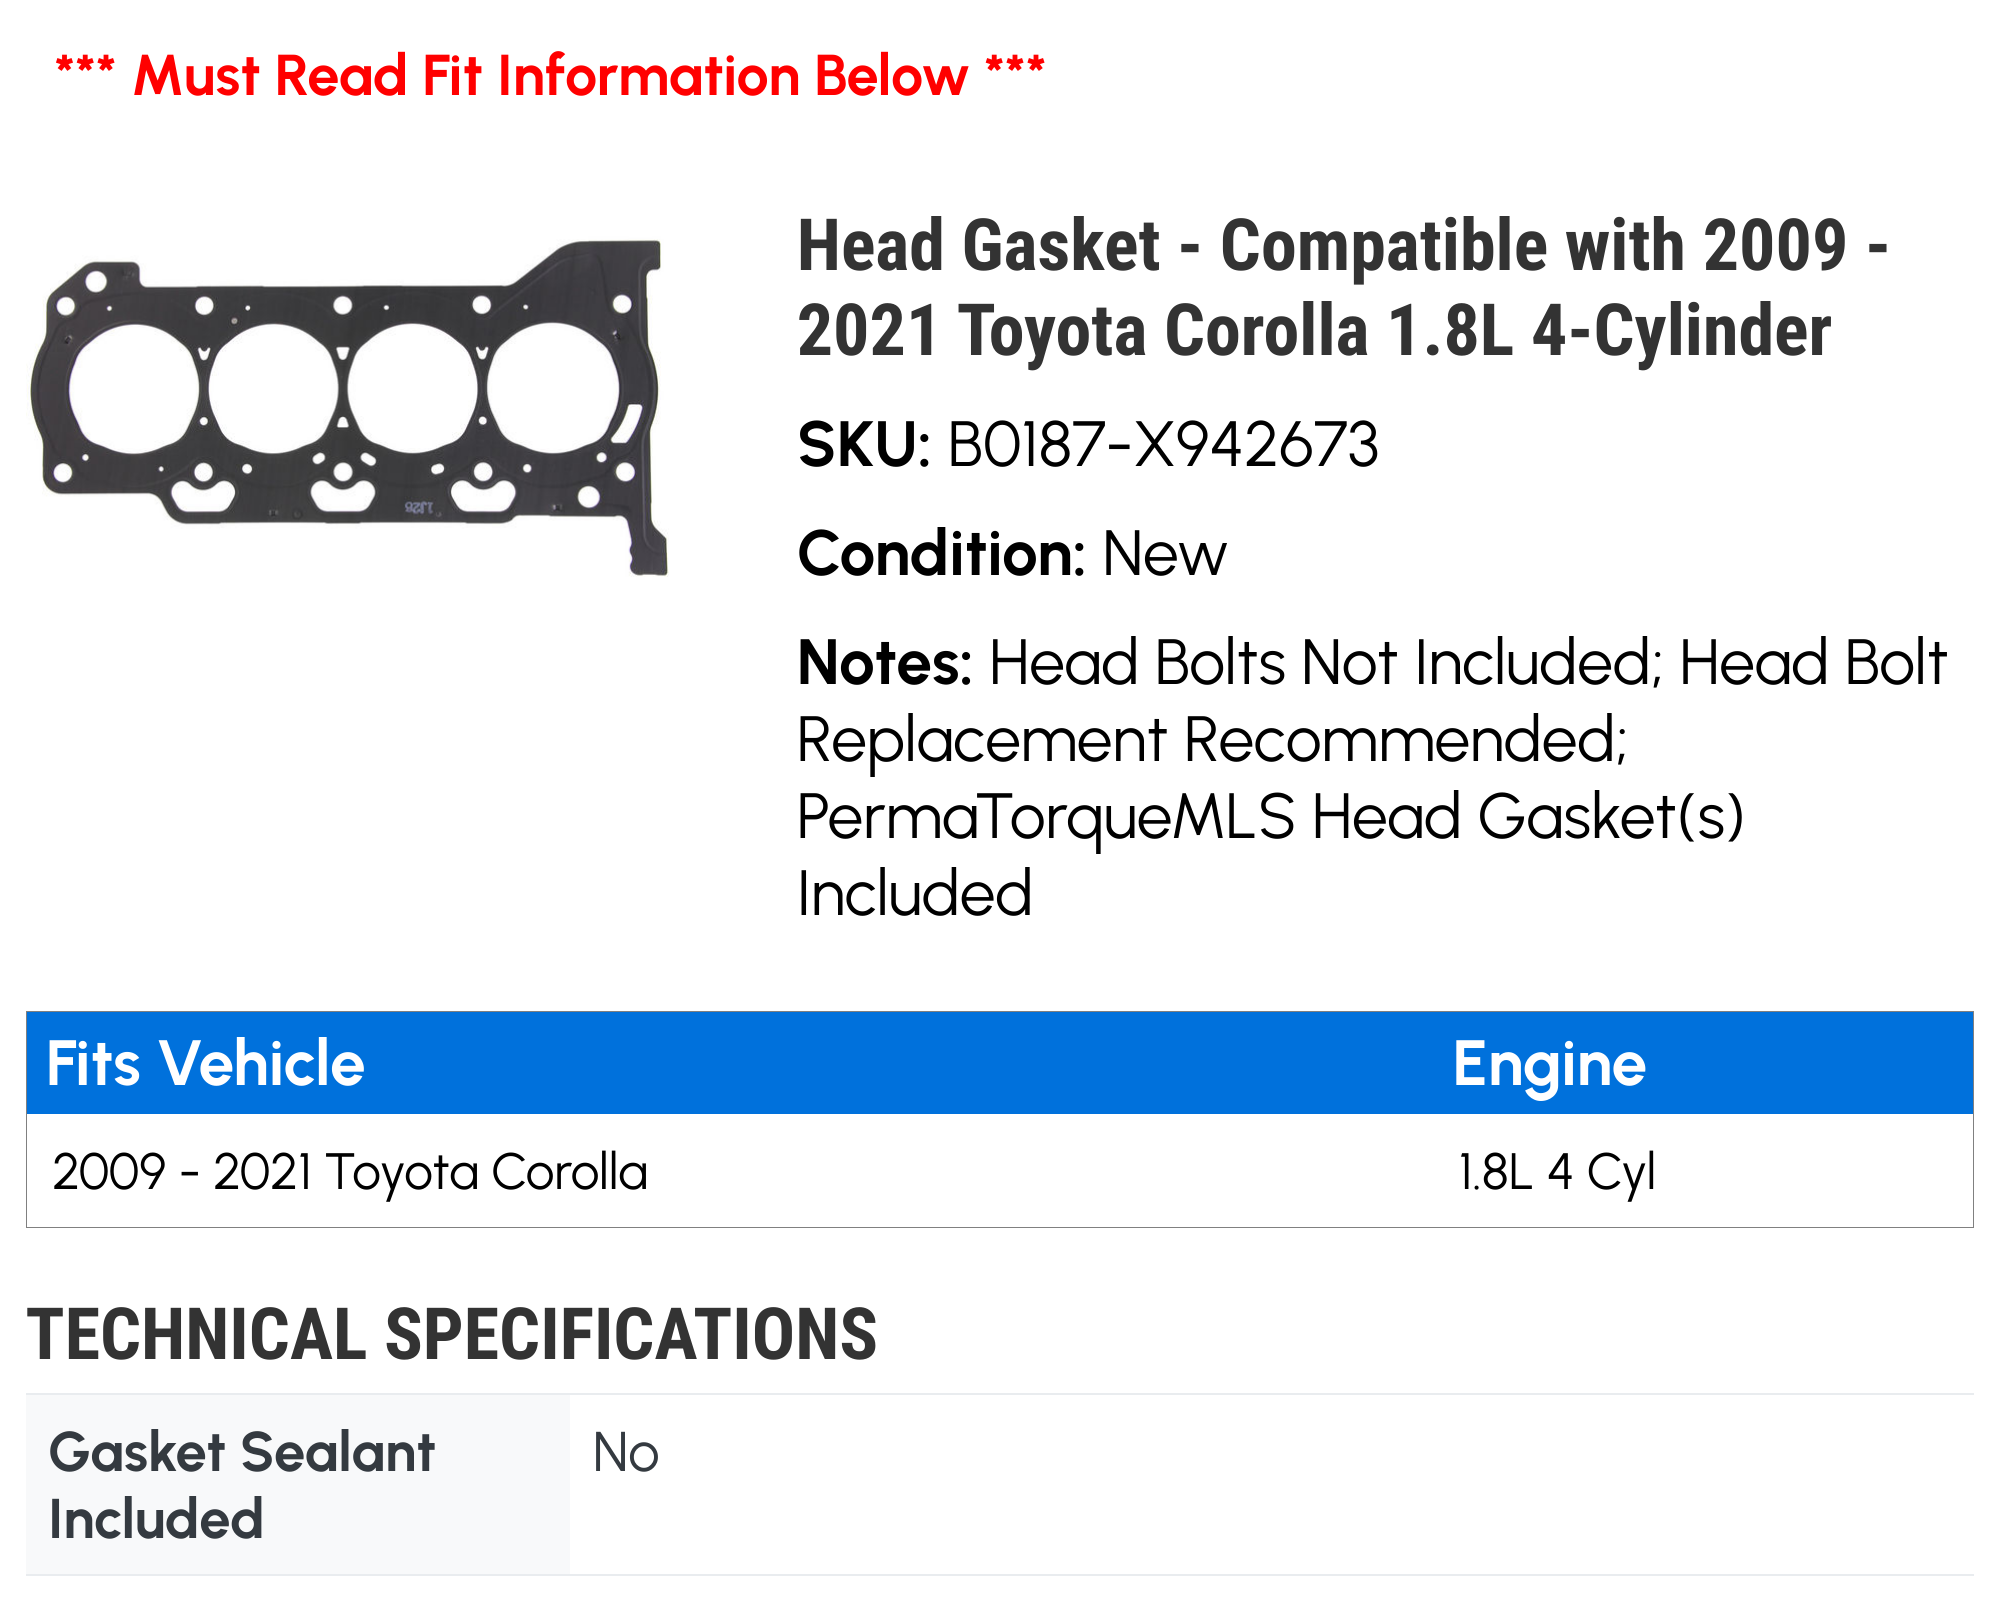 Head Gasket Compatible with 2009 2021 Toyota Corolla 1.8L 4-Cylinder  2010 2011 2012 2013 2014 2015 2016 2017 2018 2019 2020